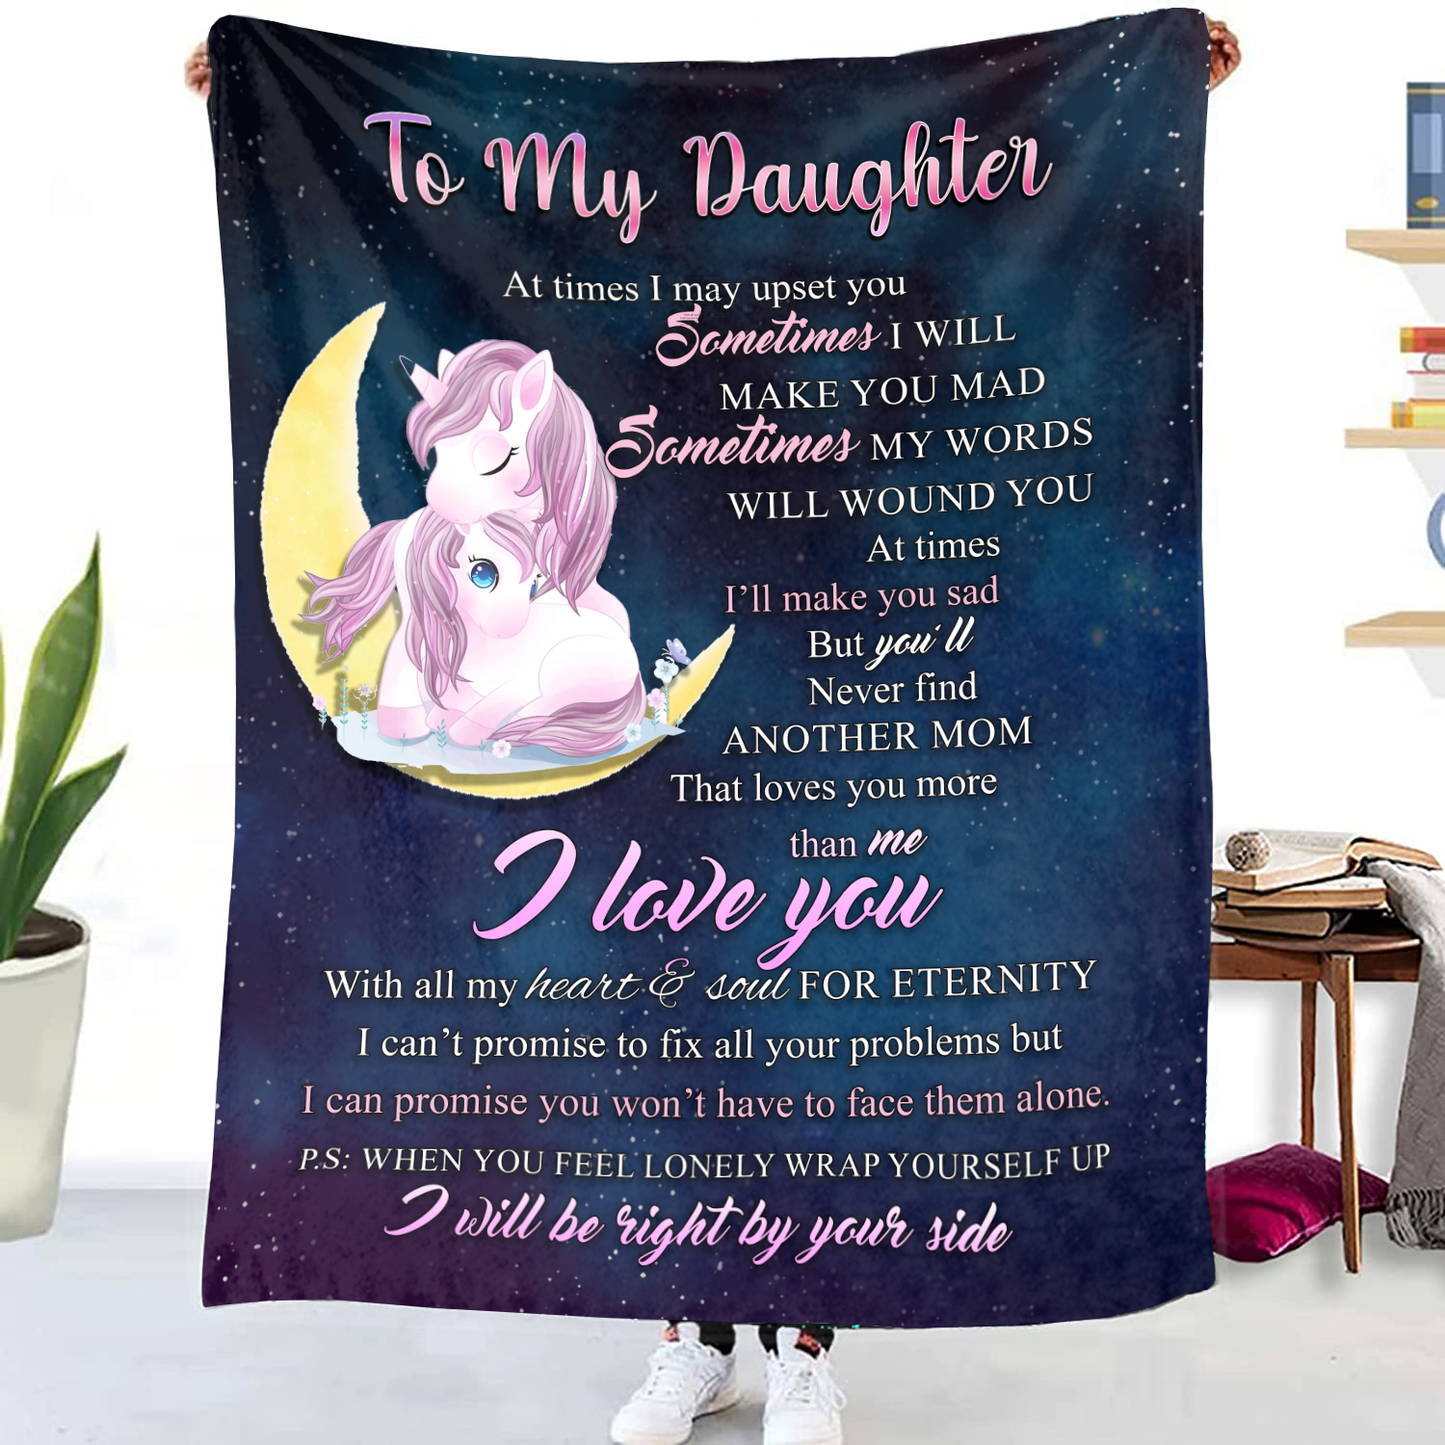 To My Daughter - I Love You Premium Mink Sherpa Blanket